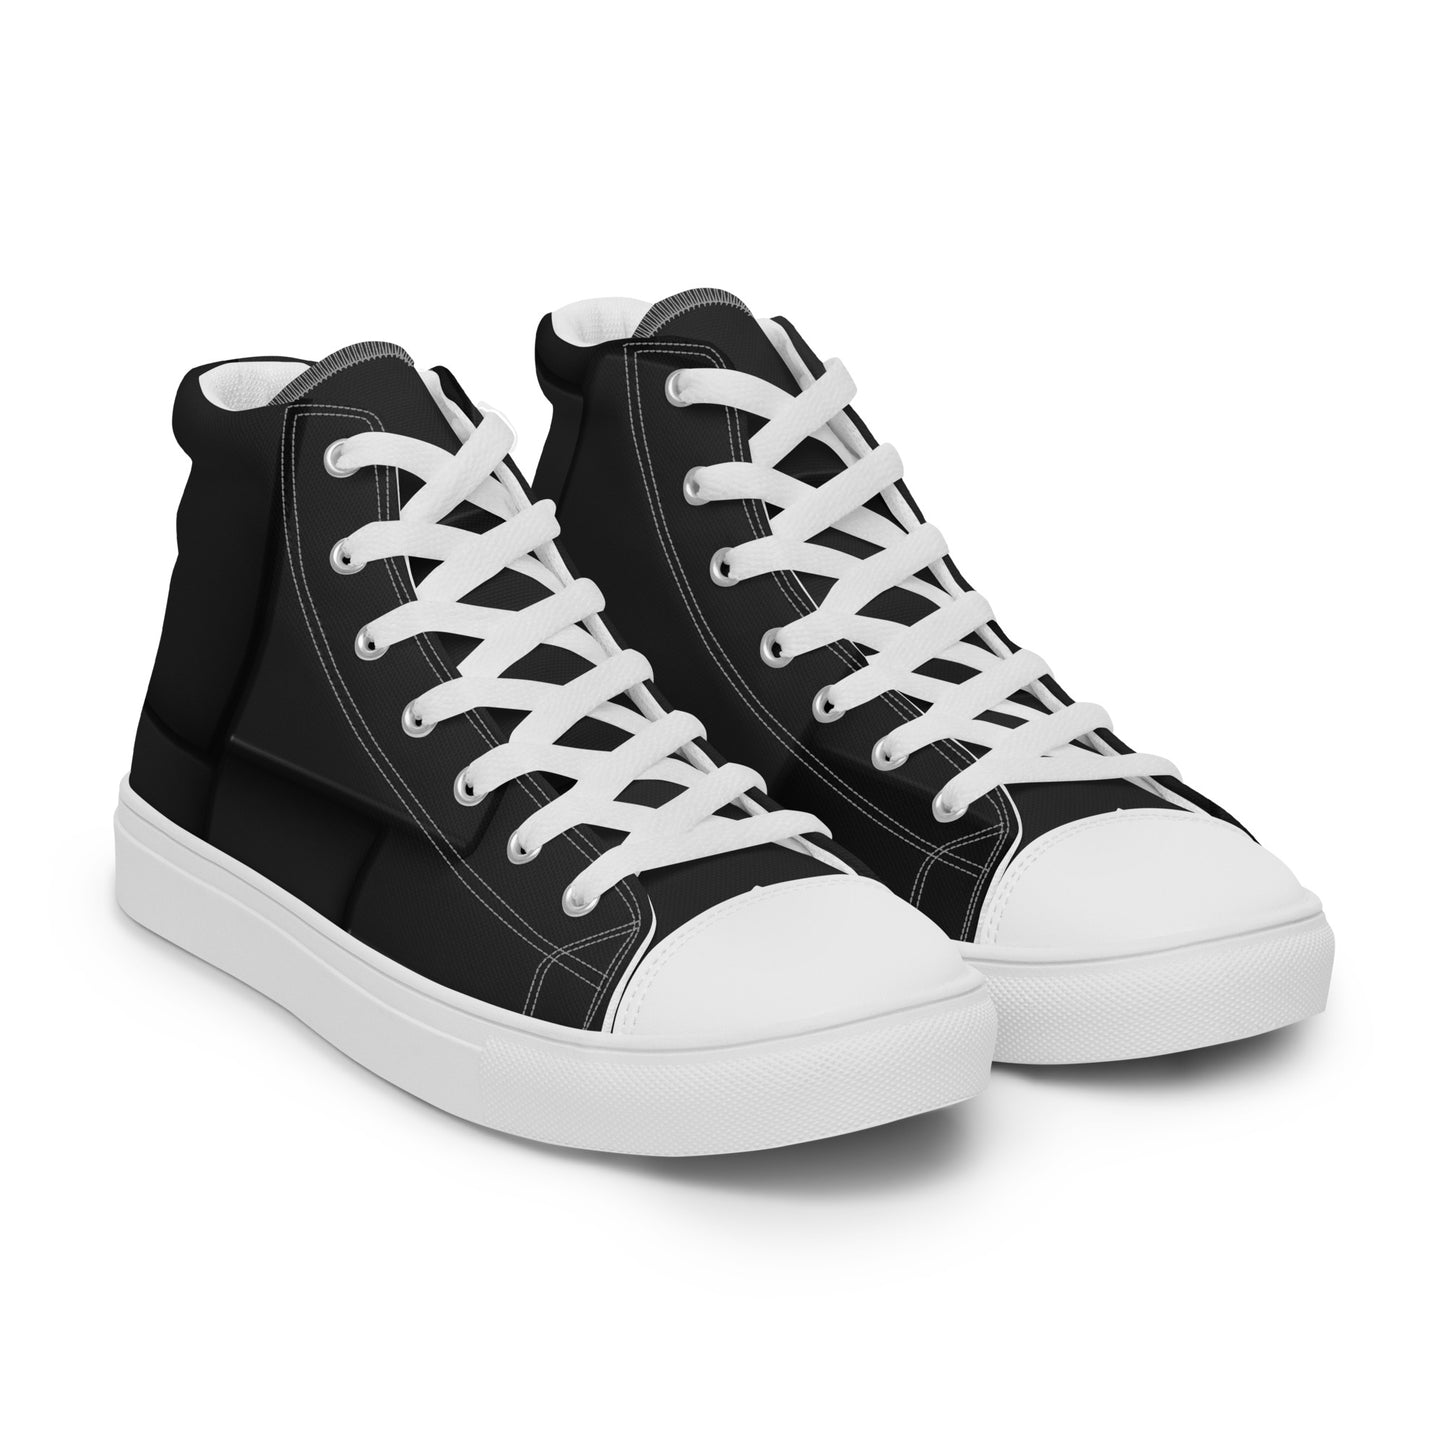 Squares high top canvas shoes